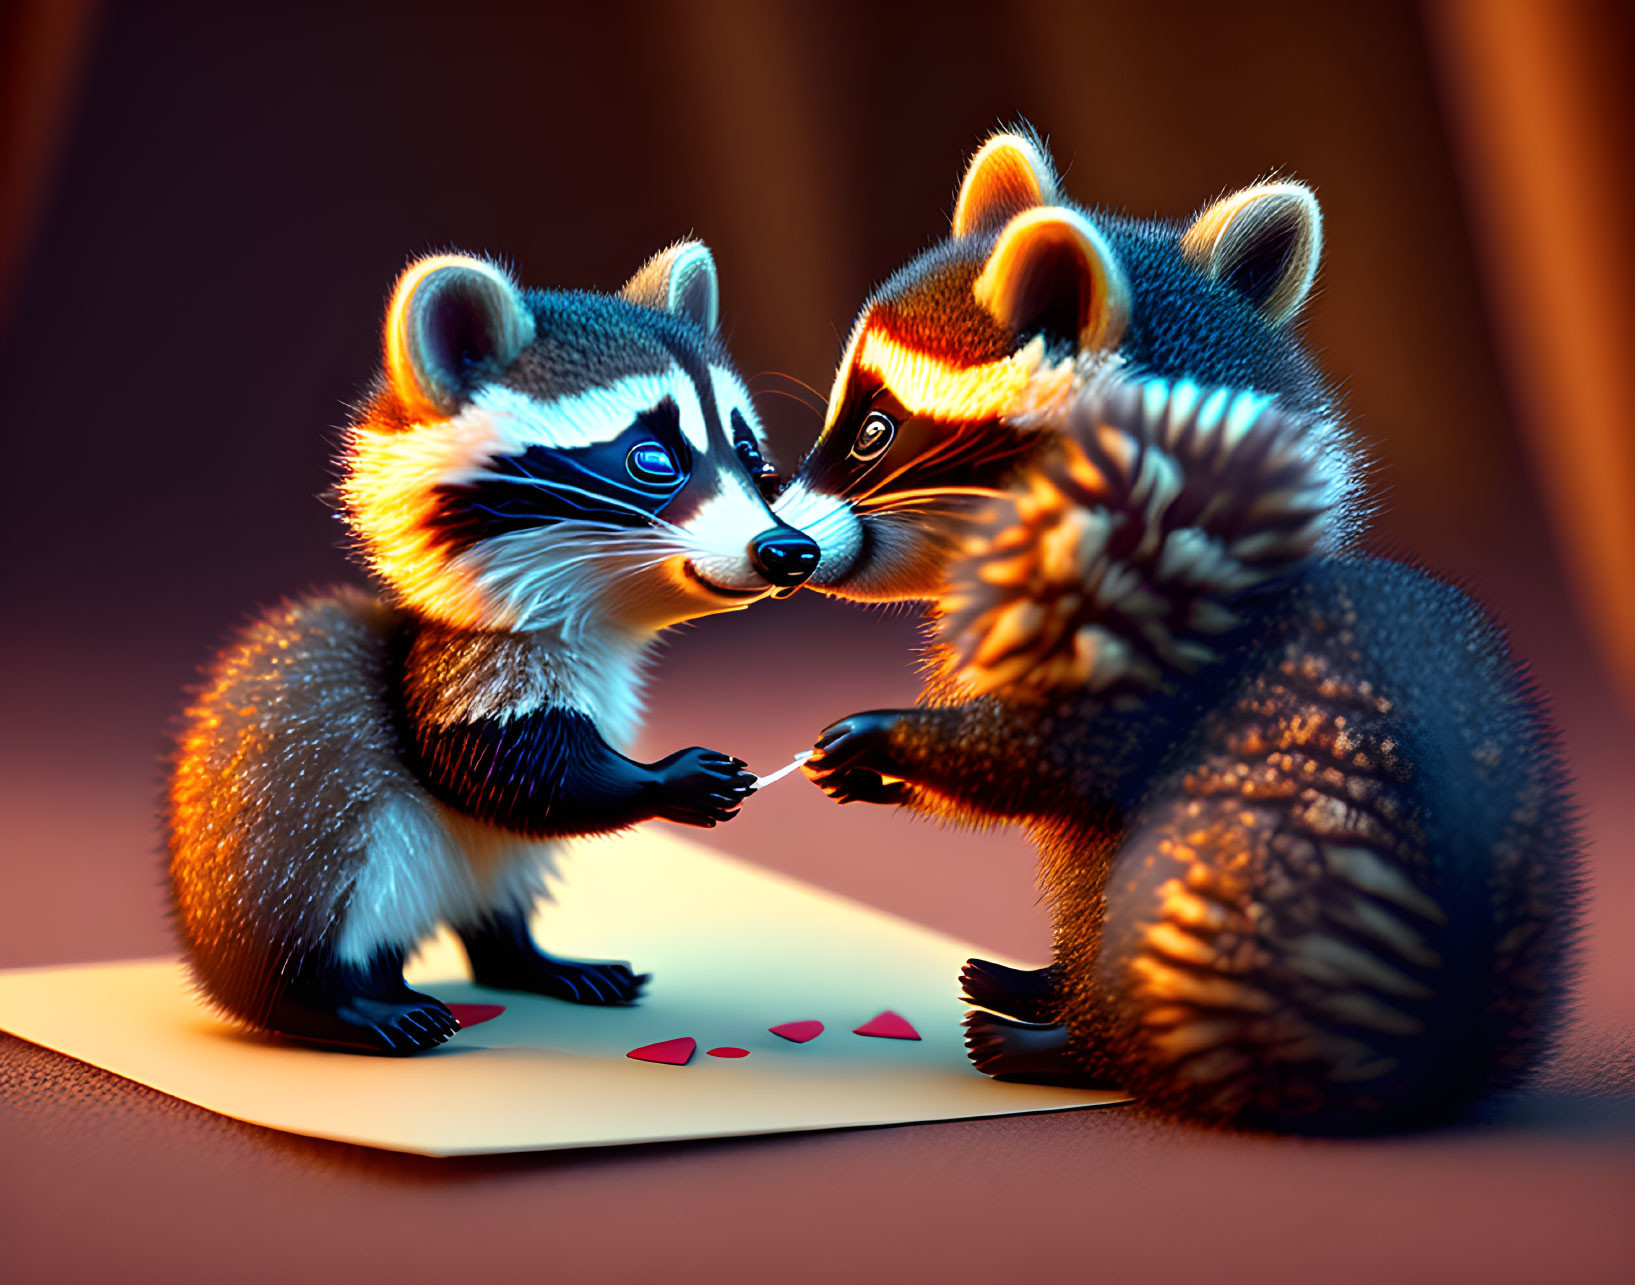 Animated raccoons share heartwarming moment in cozy setting